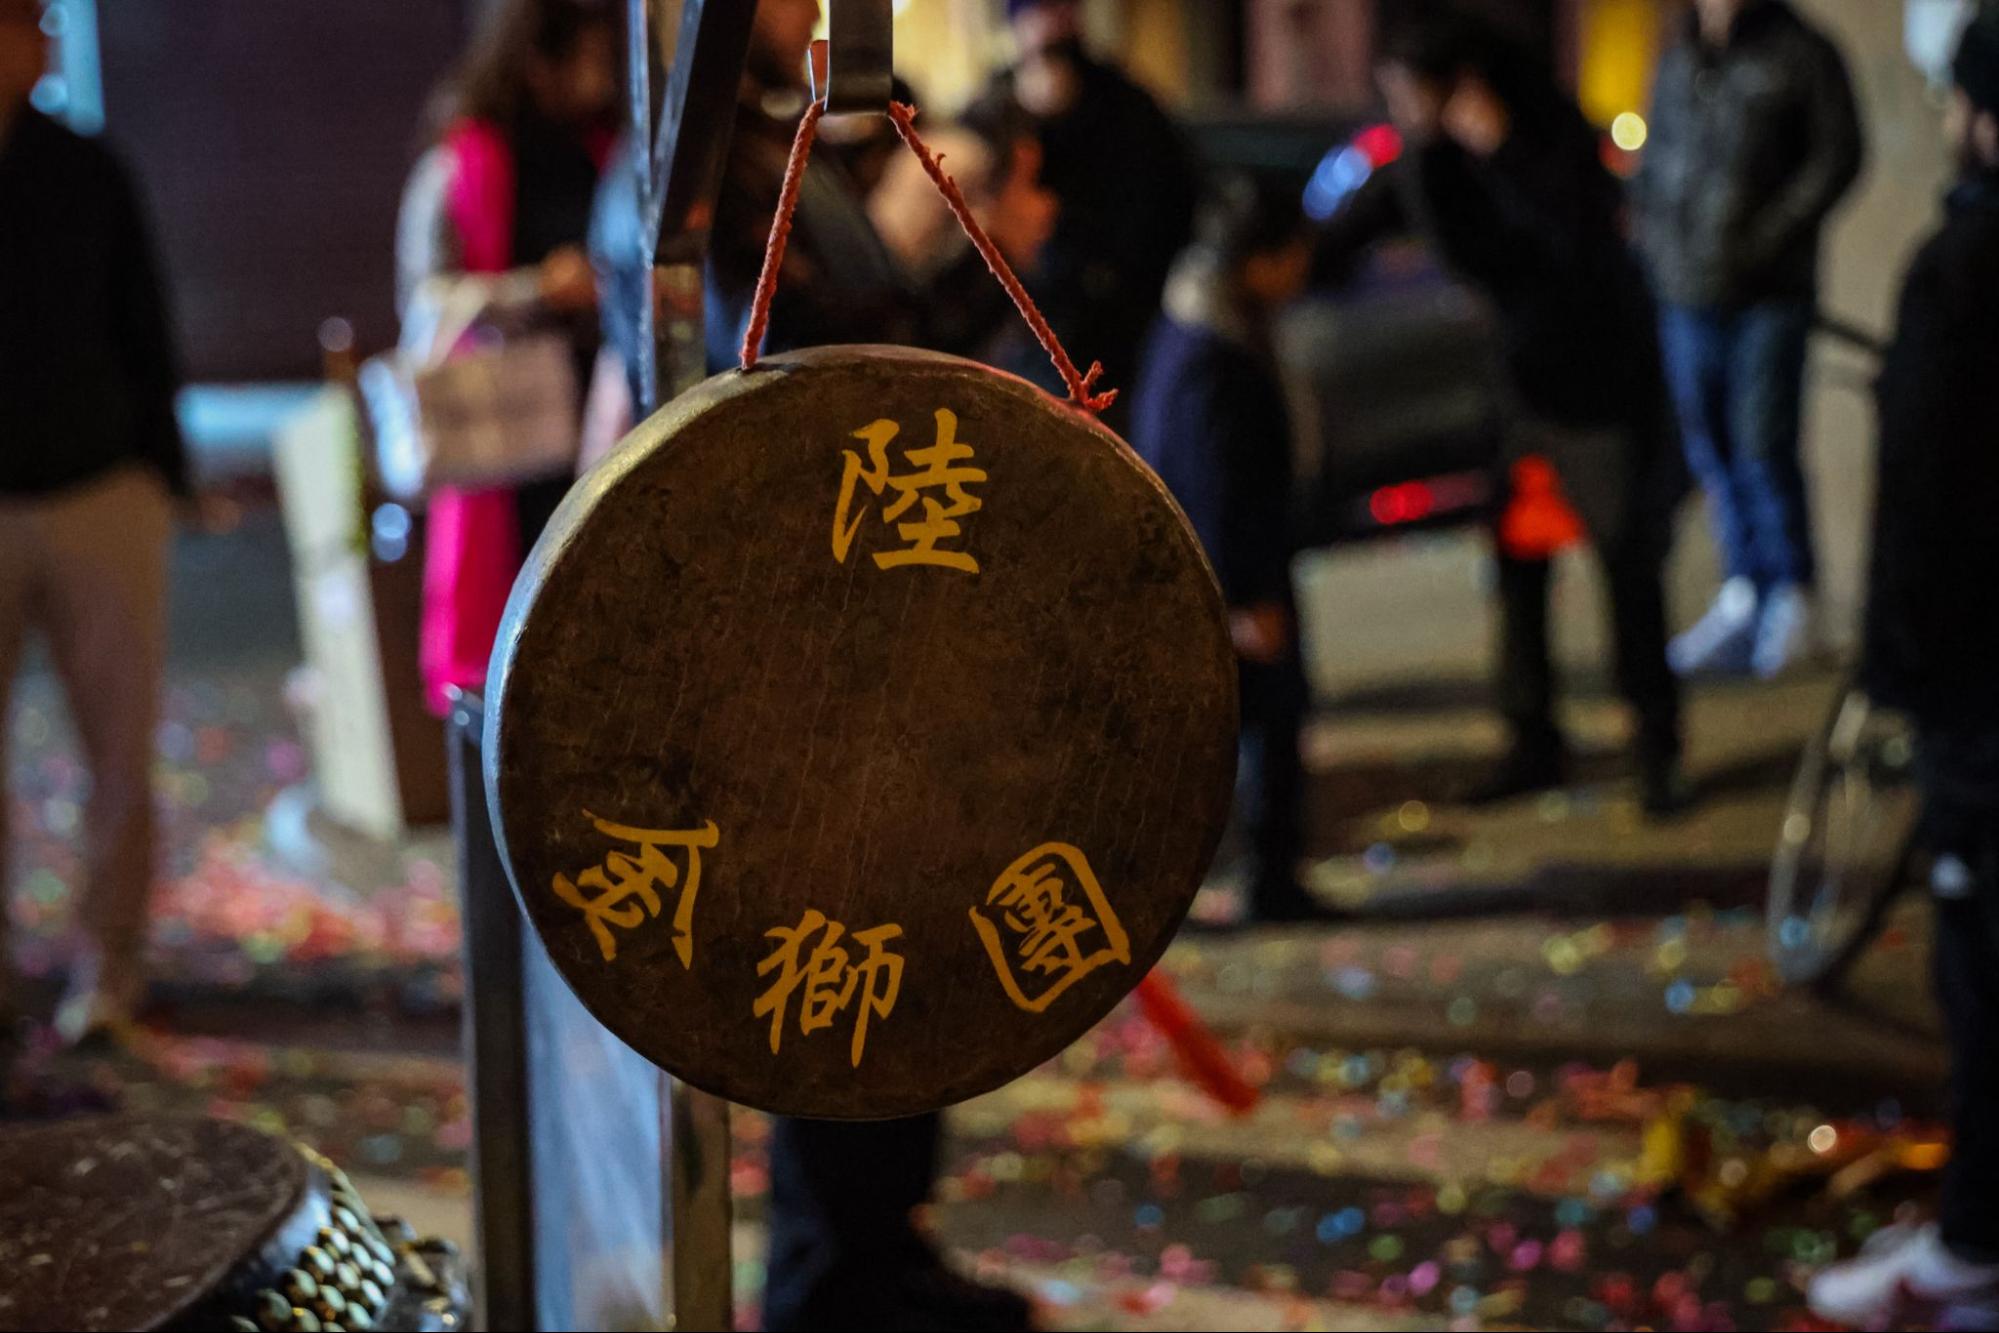 A gong with yellow Chinese characters hangs from a red string.